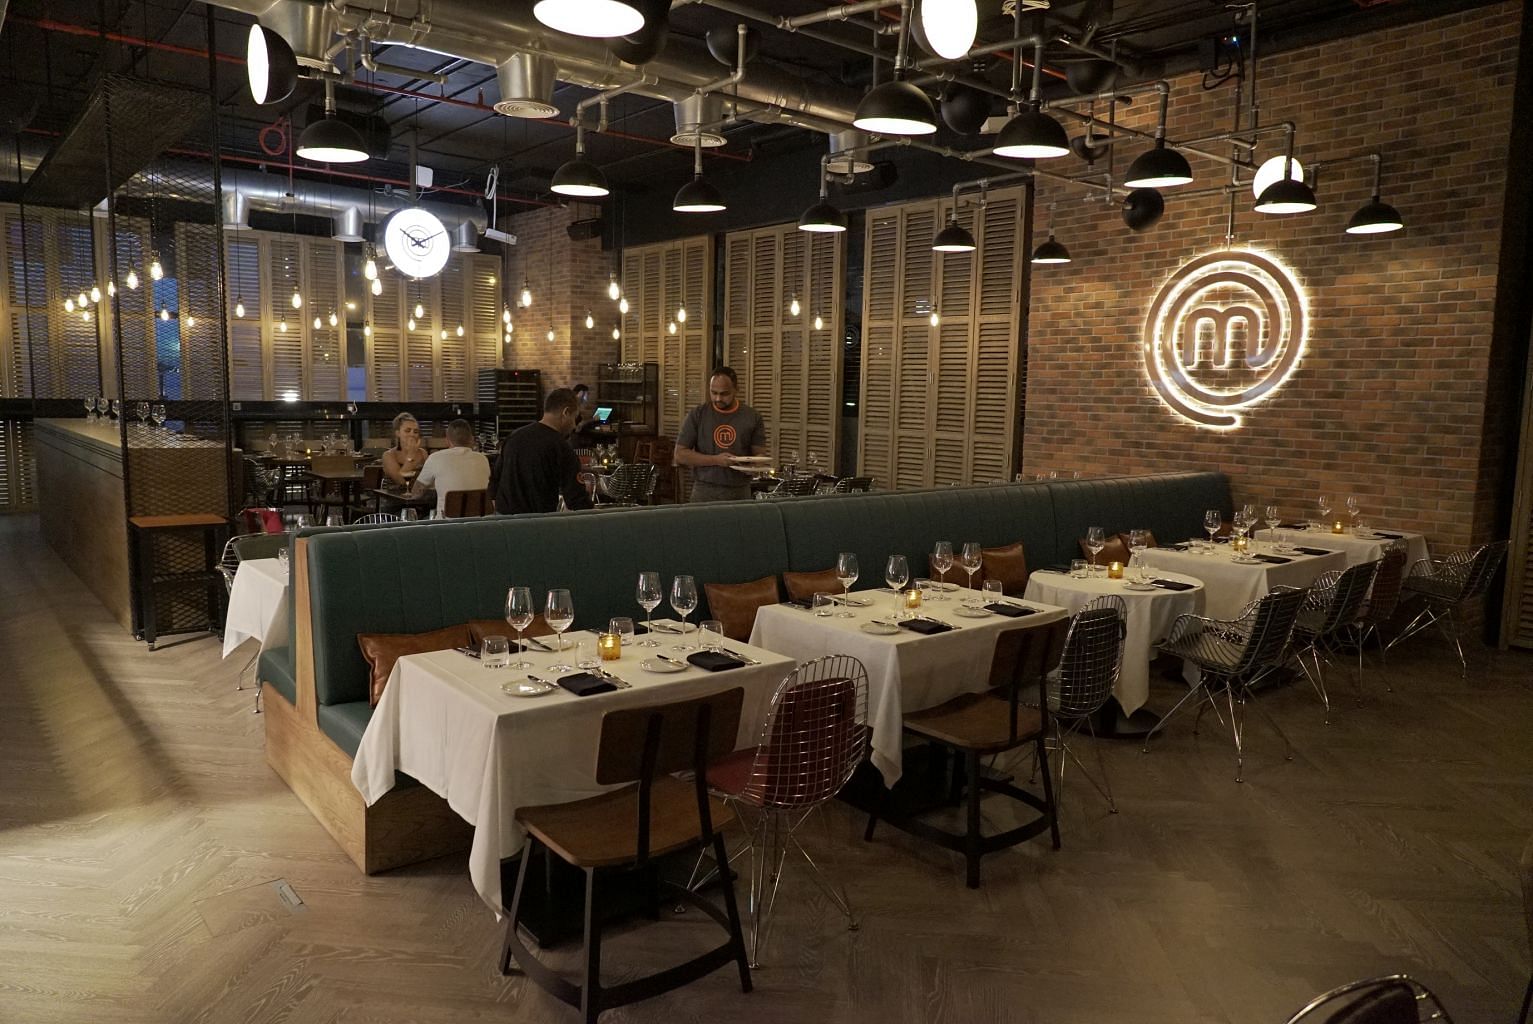 The interior of MasterChef, The TV Experience restaurant, which is based on the popular reality TV show MasterChef.